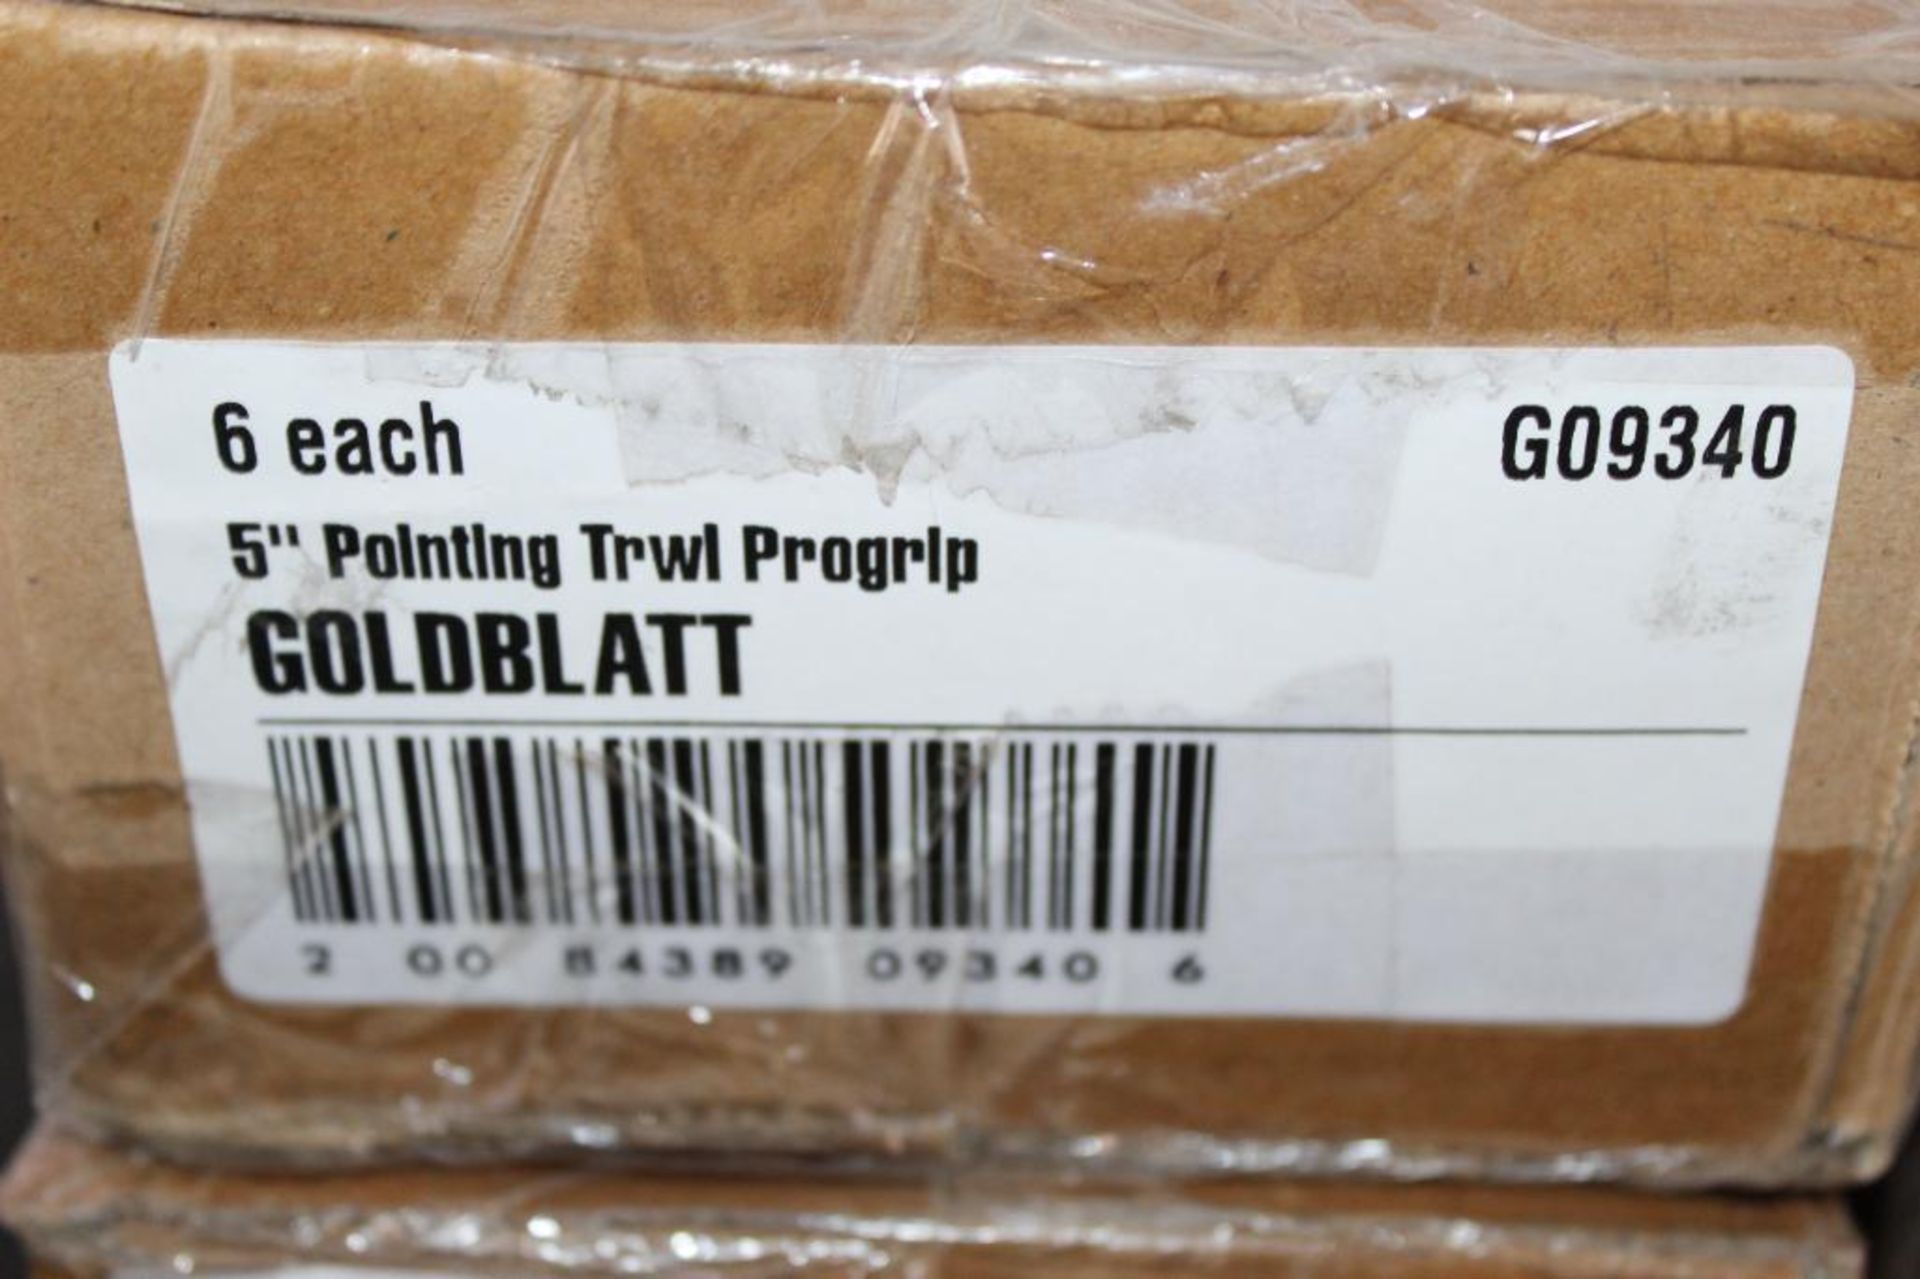 Lot of (4) Boxes (24 Total) Goldblatt 5" Pointing Trowel ProGrip G09340 - Image 4 of 4